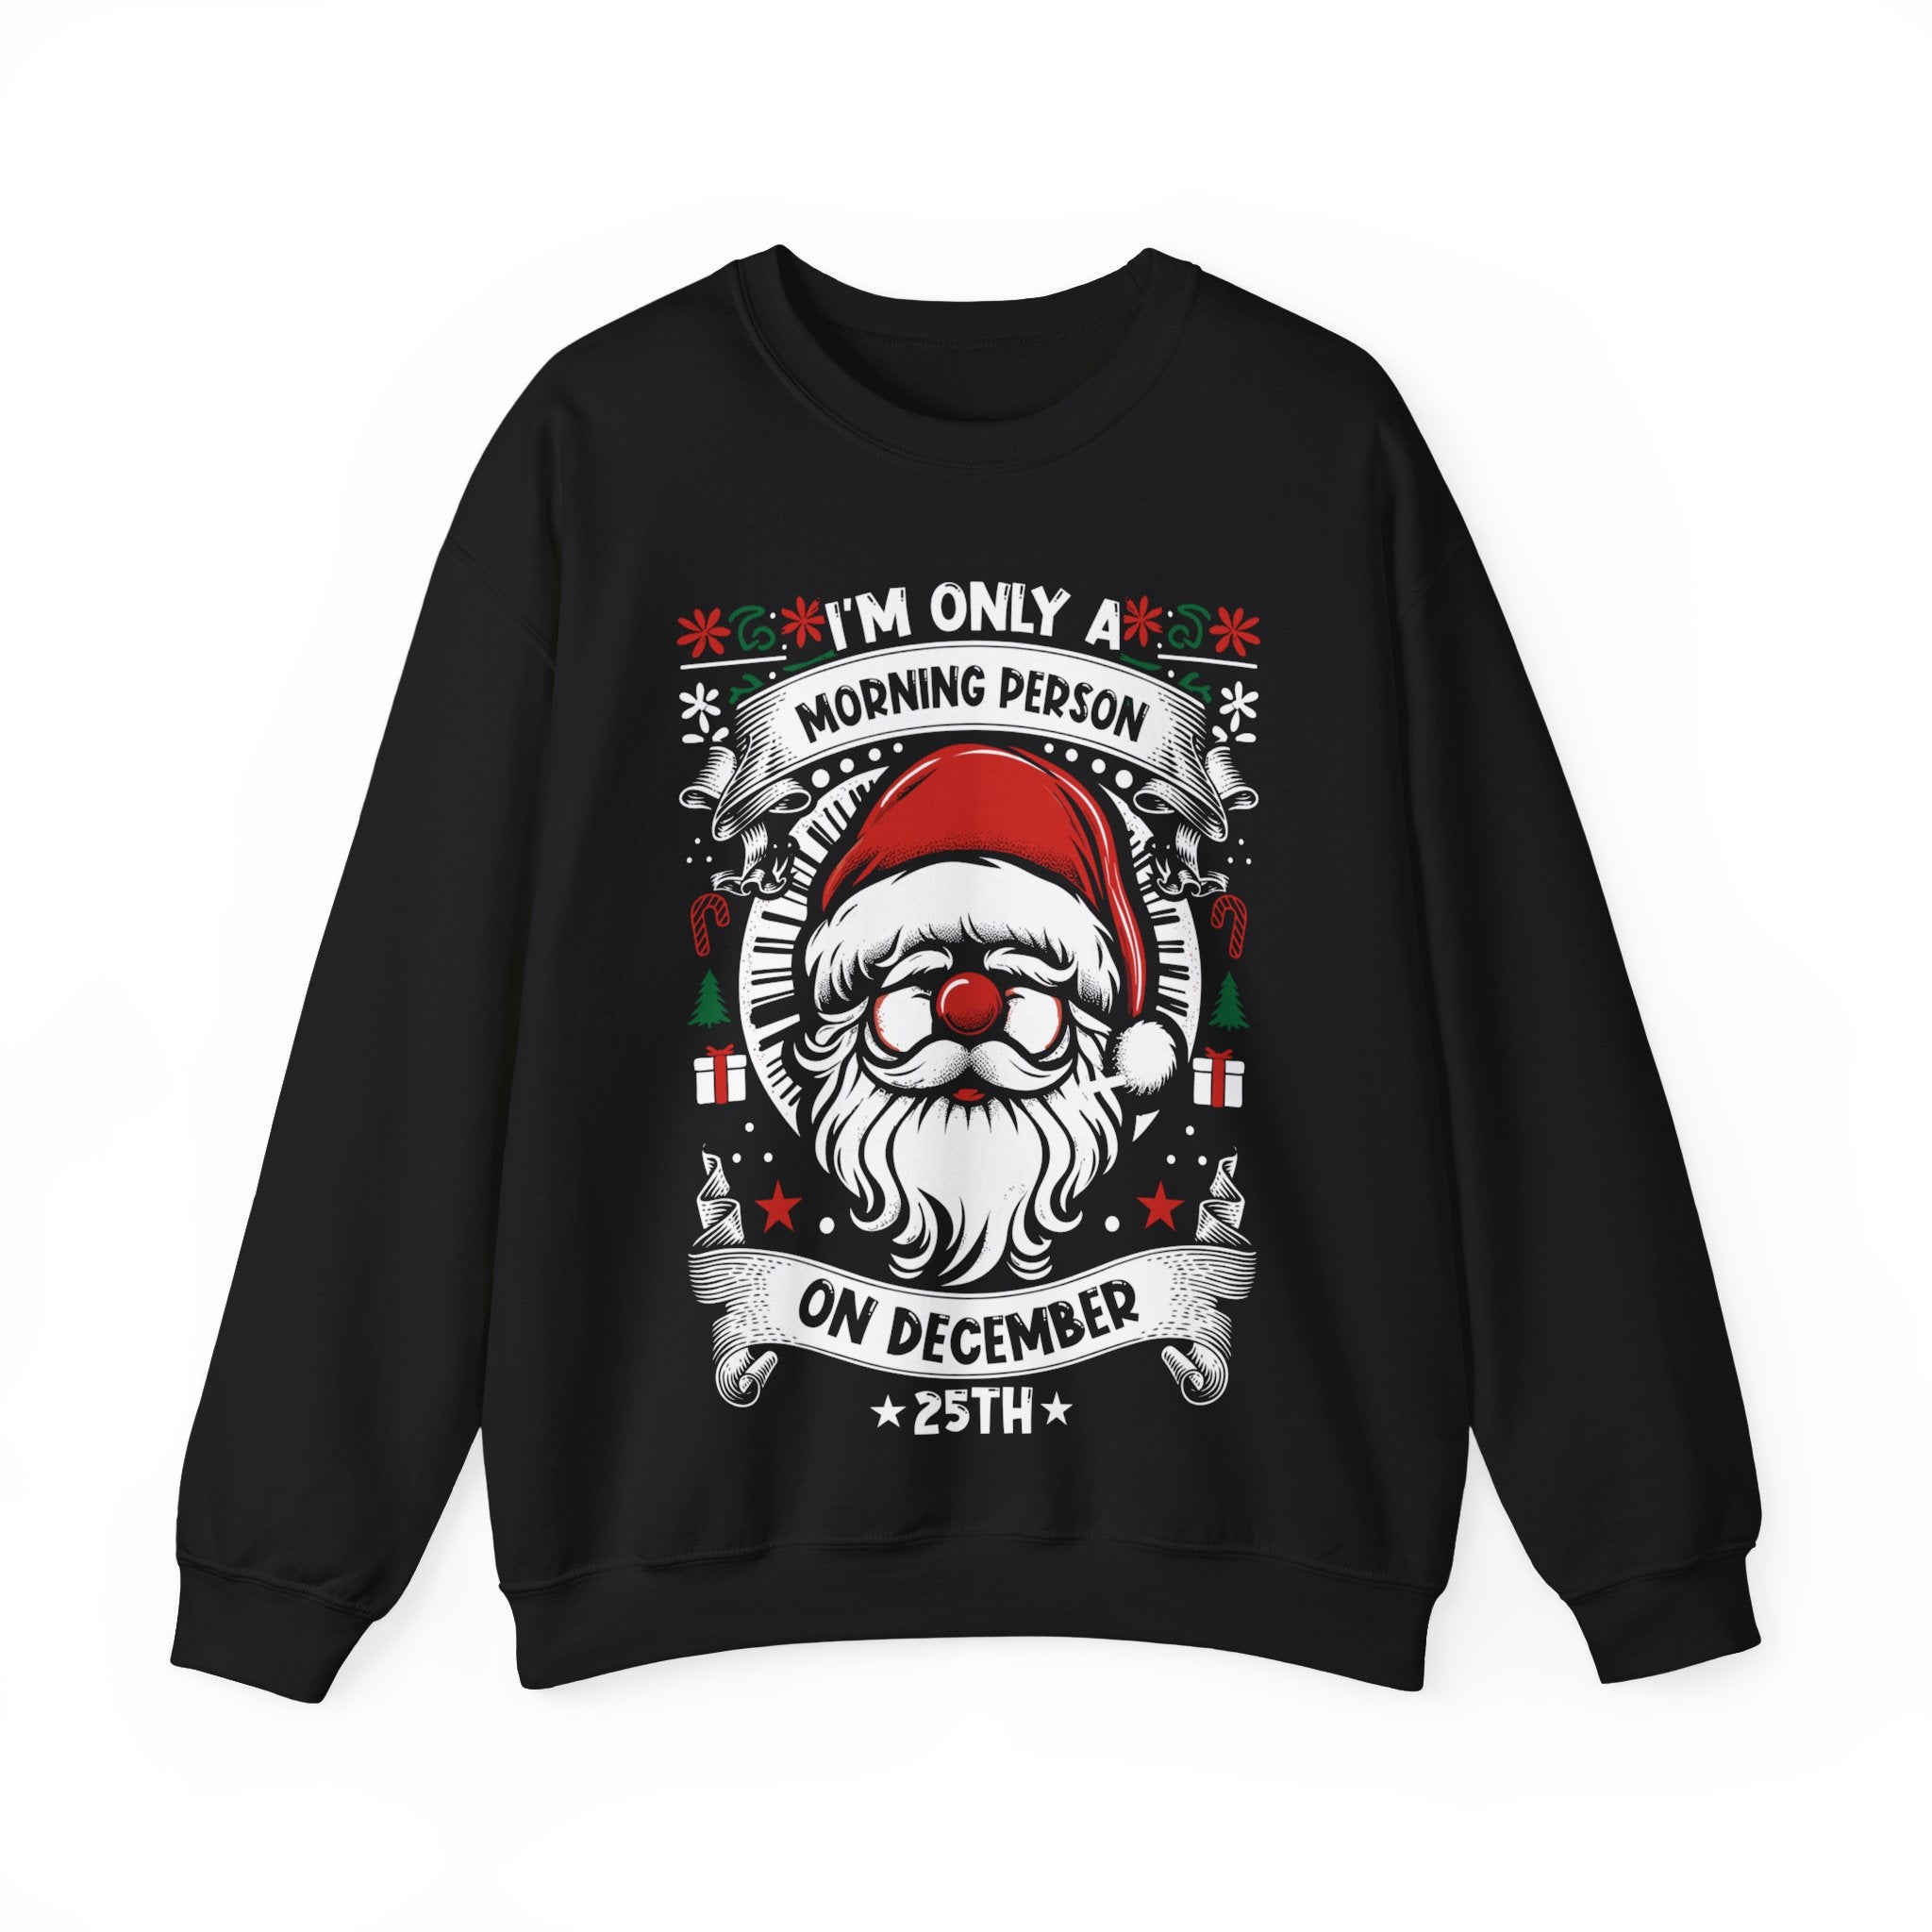 "I'm Only A Morning Person" Christmas Sweatshirt